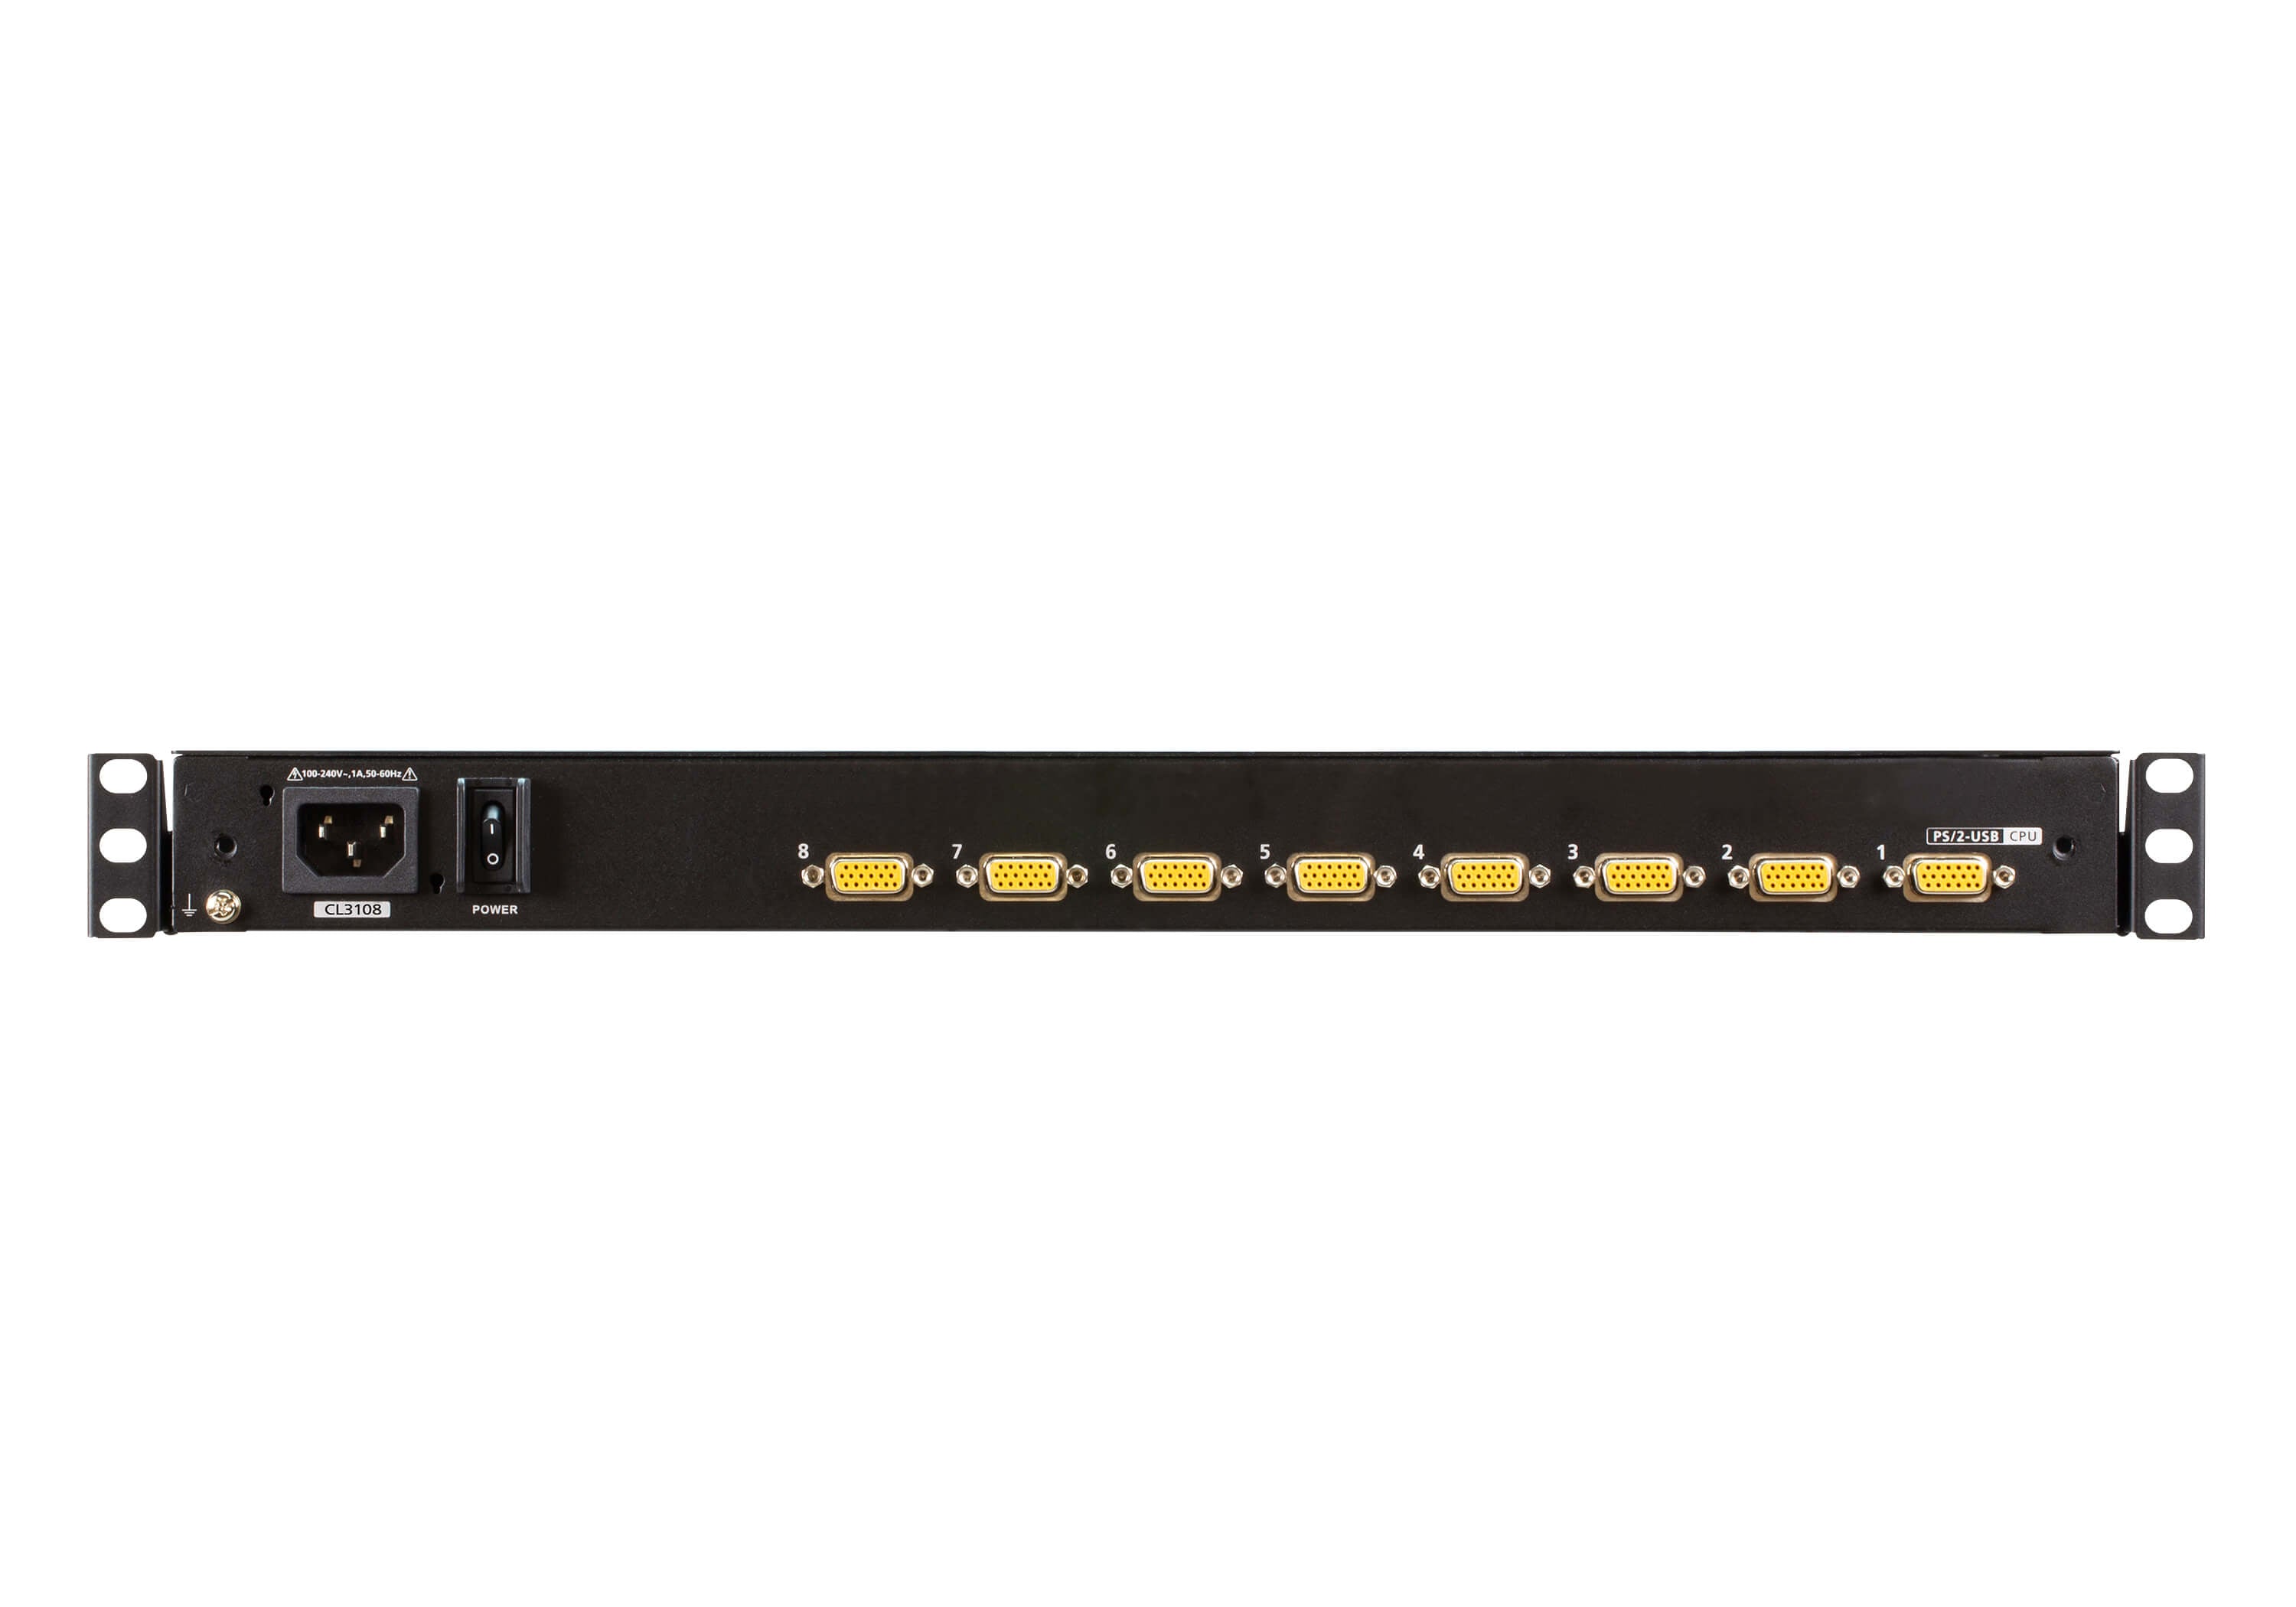 Aten 8-Port PS/2-USB VGA Single Rail WideScreen LCD KVM Switch- CL3108NX (1 Year Manufacture Local Warranty In Singapore)